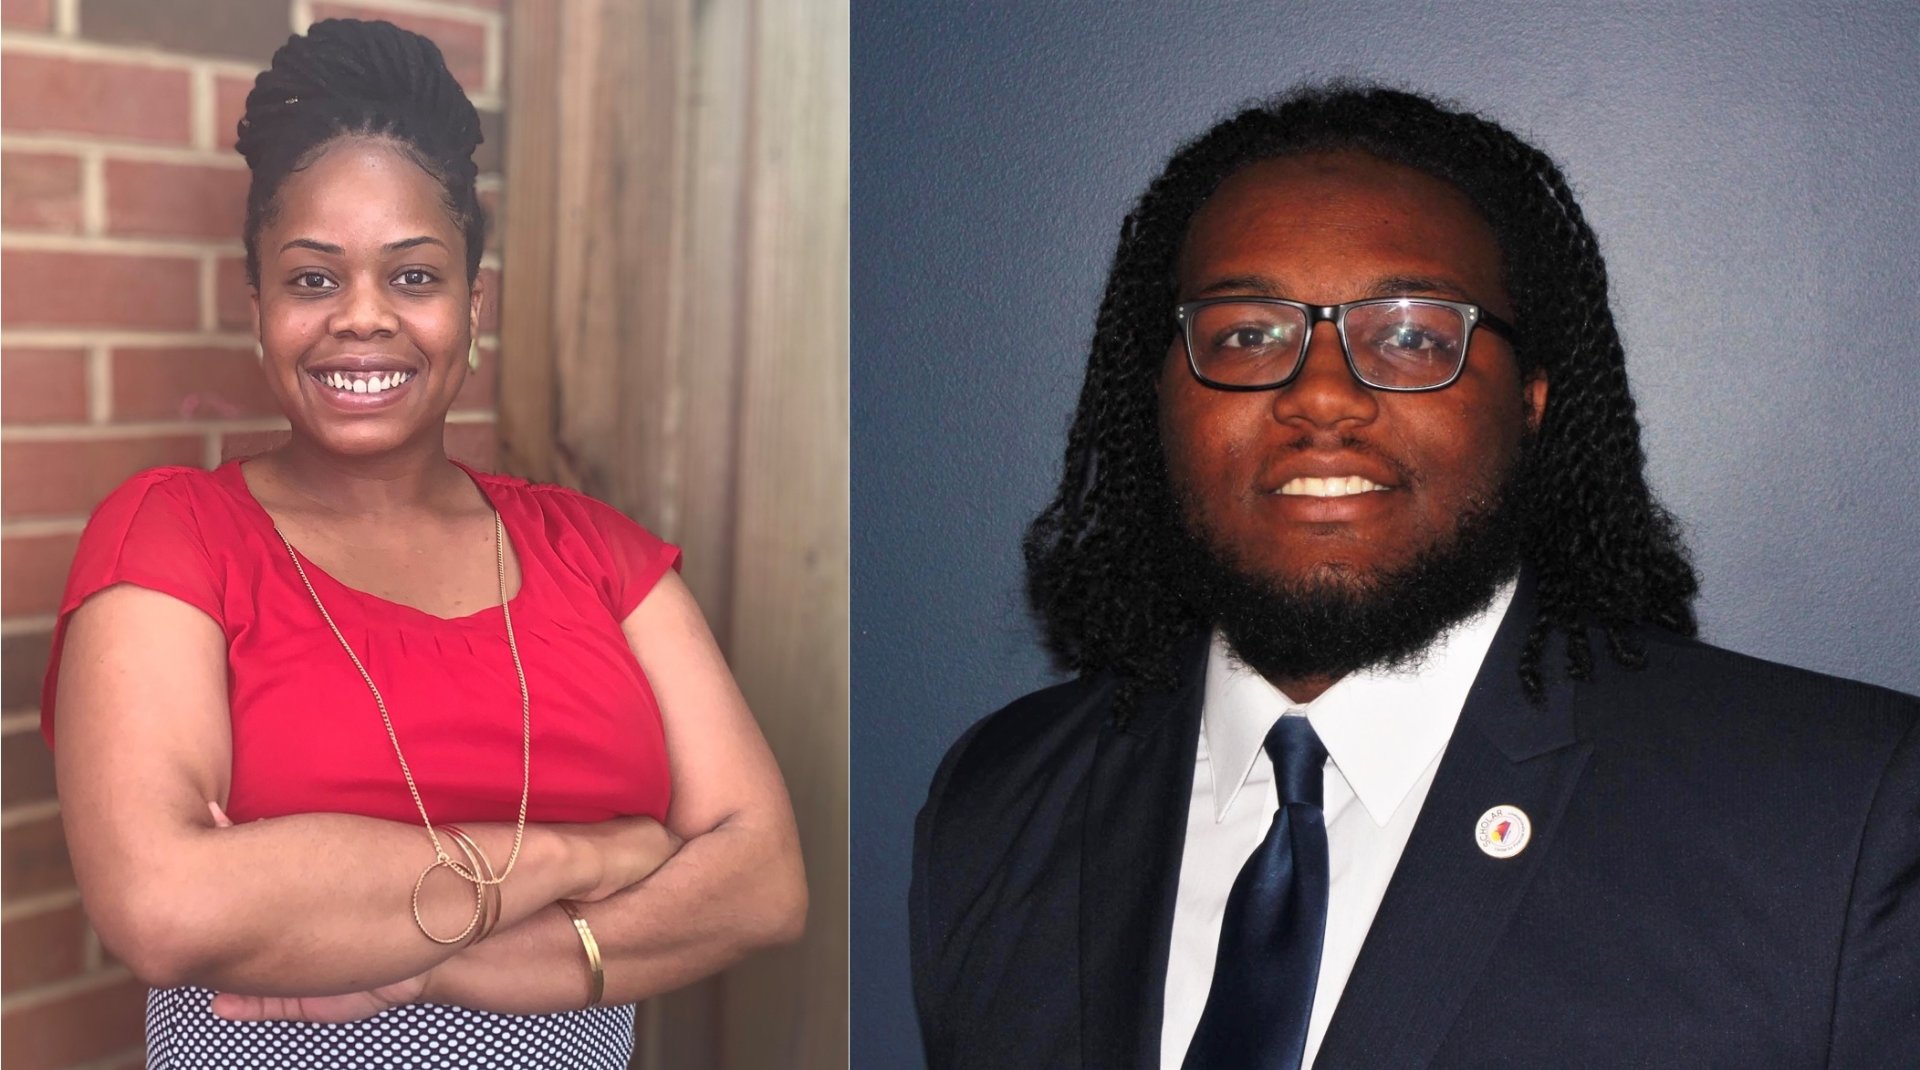 The U.S. Department of Agriculture (USDA) recently recognized several graduating 1890 National Scholars, including Fort Valley State University students Asha Fears and Jaylan Horton, during a virtual commencement ceremony.